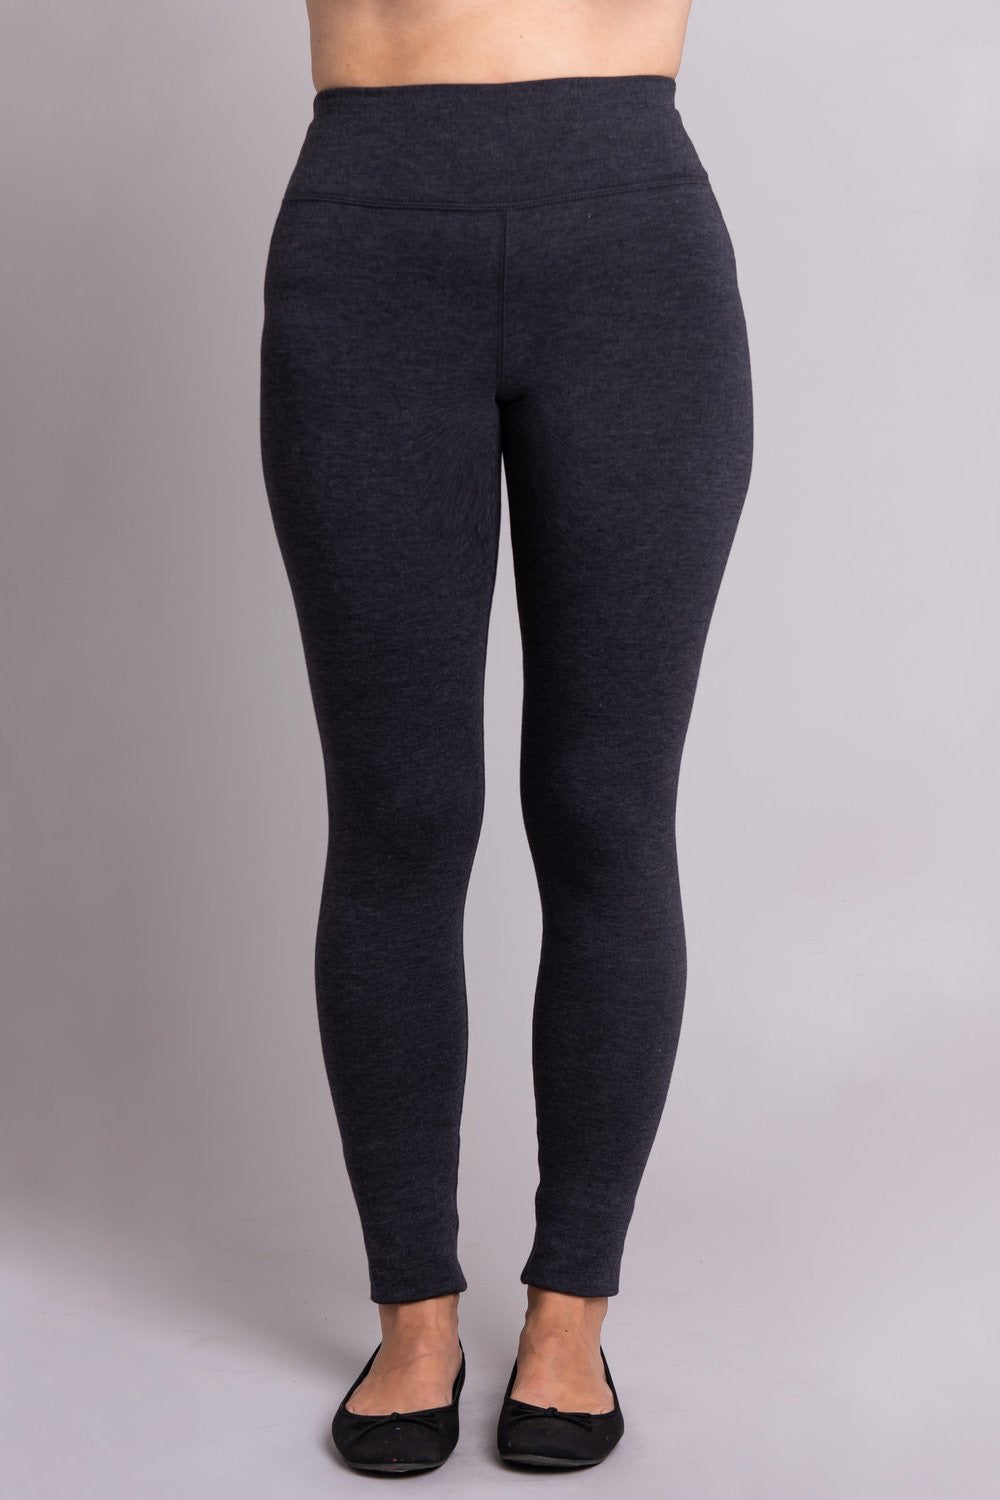 Woman Within Women's Grey Caged Soft Plus Size Leggings M 14/16 - $14 -  From Sasha